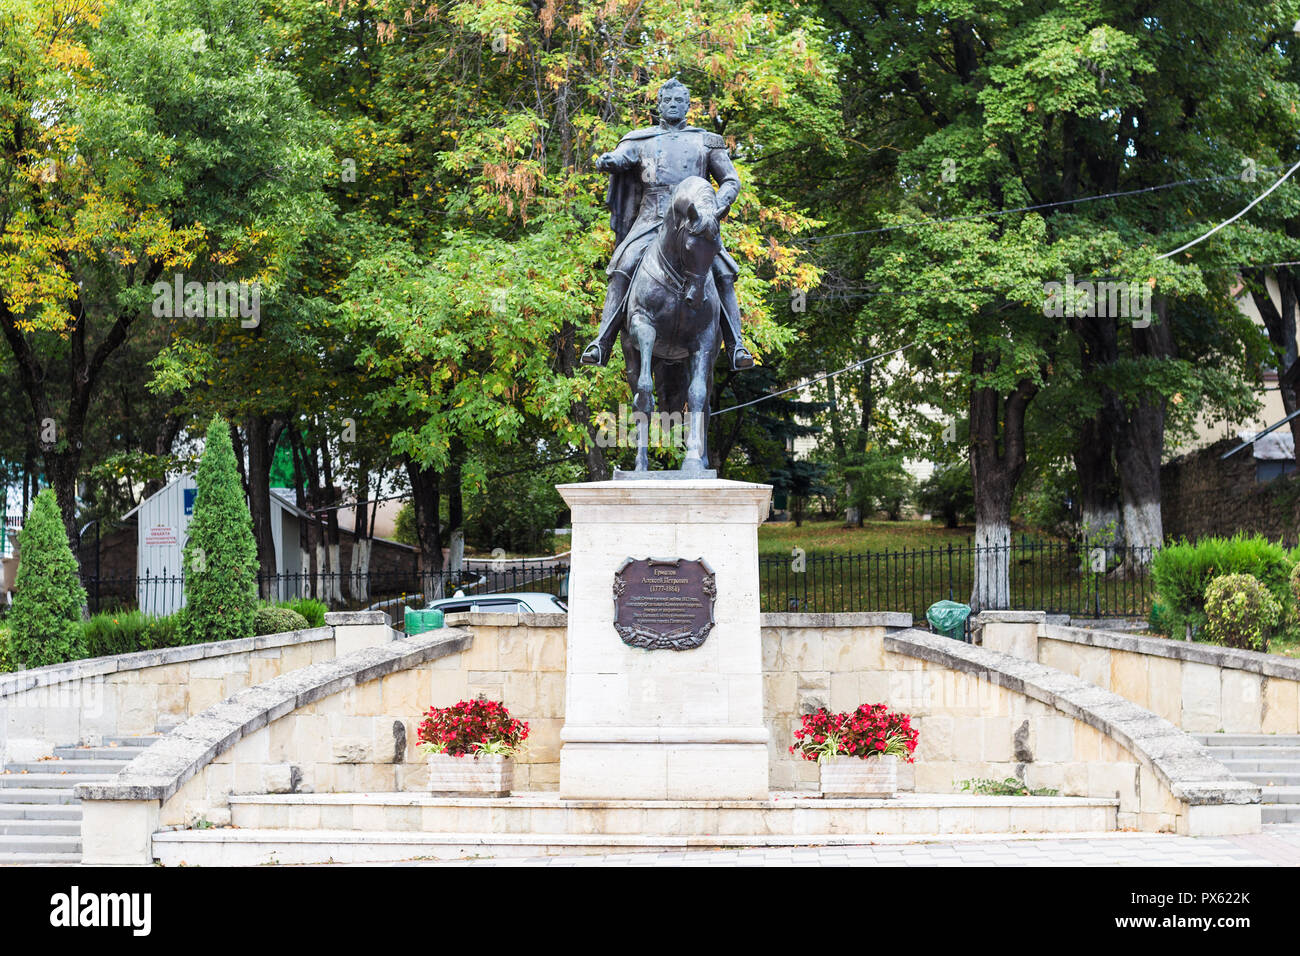 PYATIGORSK, RUSSIA - SEPTEMBER 17, 2018: front view of Monument to General Alexei Yermolov, hero of the Caucasian War. Statue was set up with funds ra Stock Photo